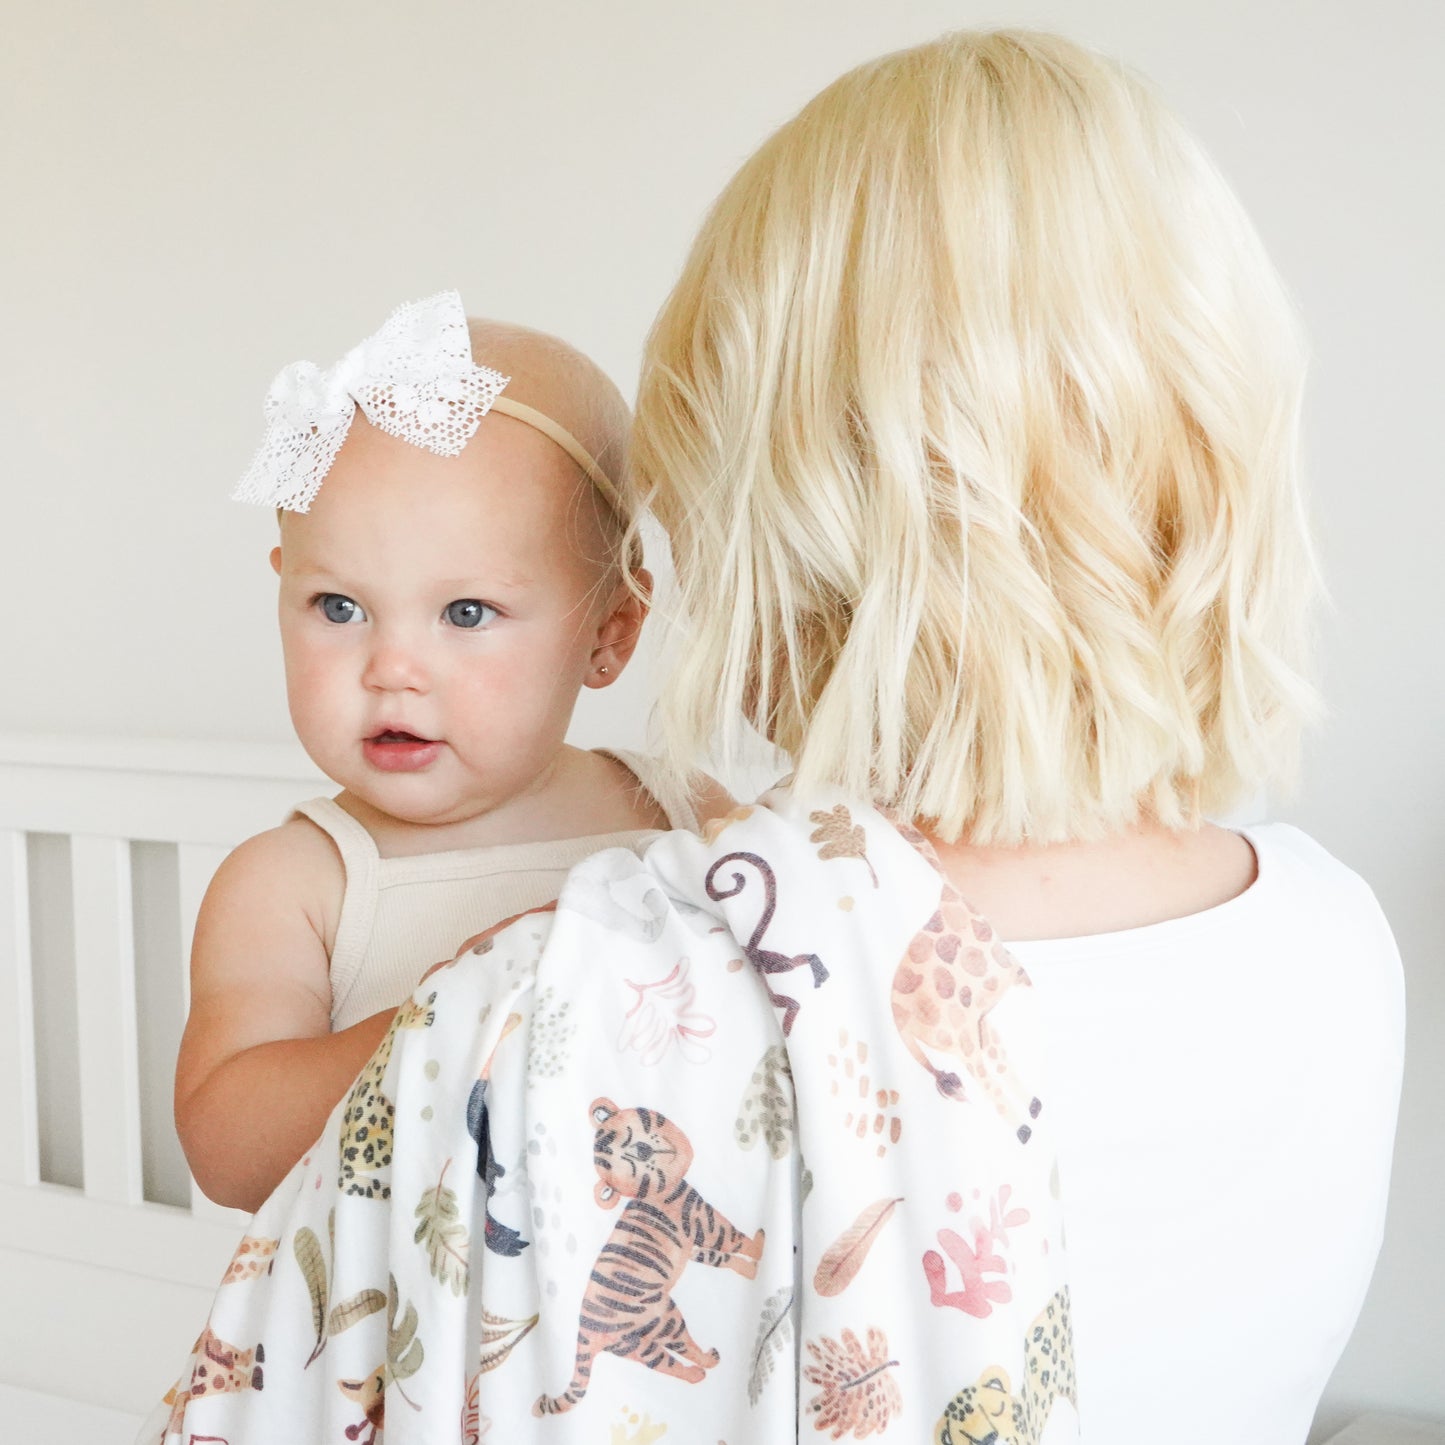 baby wearing Lily white lace bow being held y her mom with swaddle